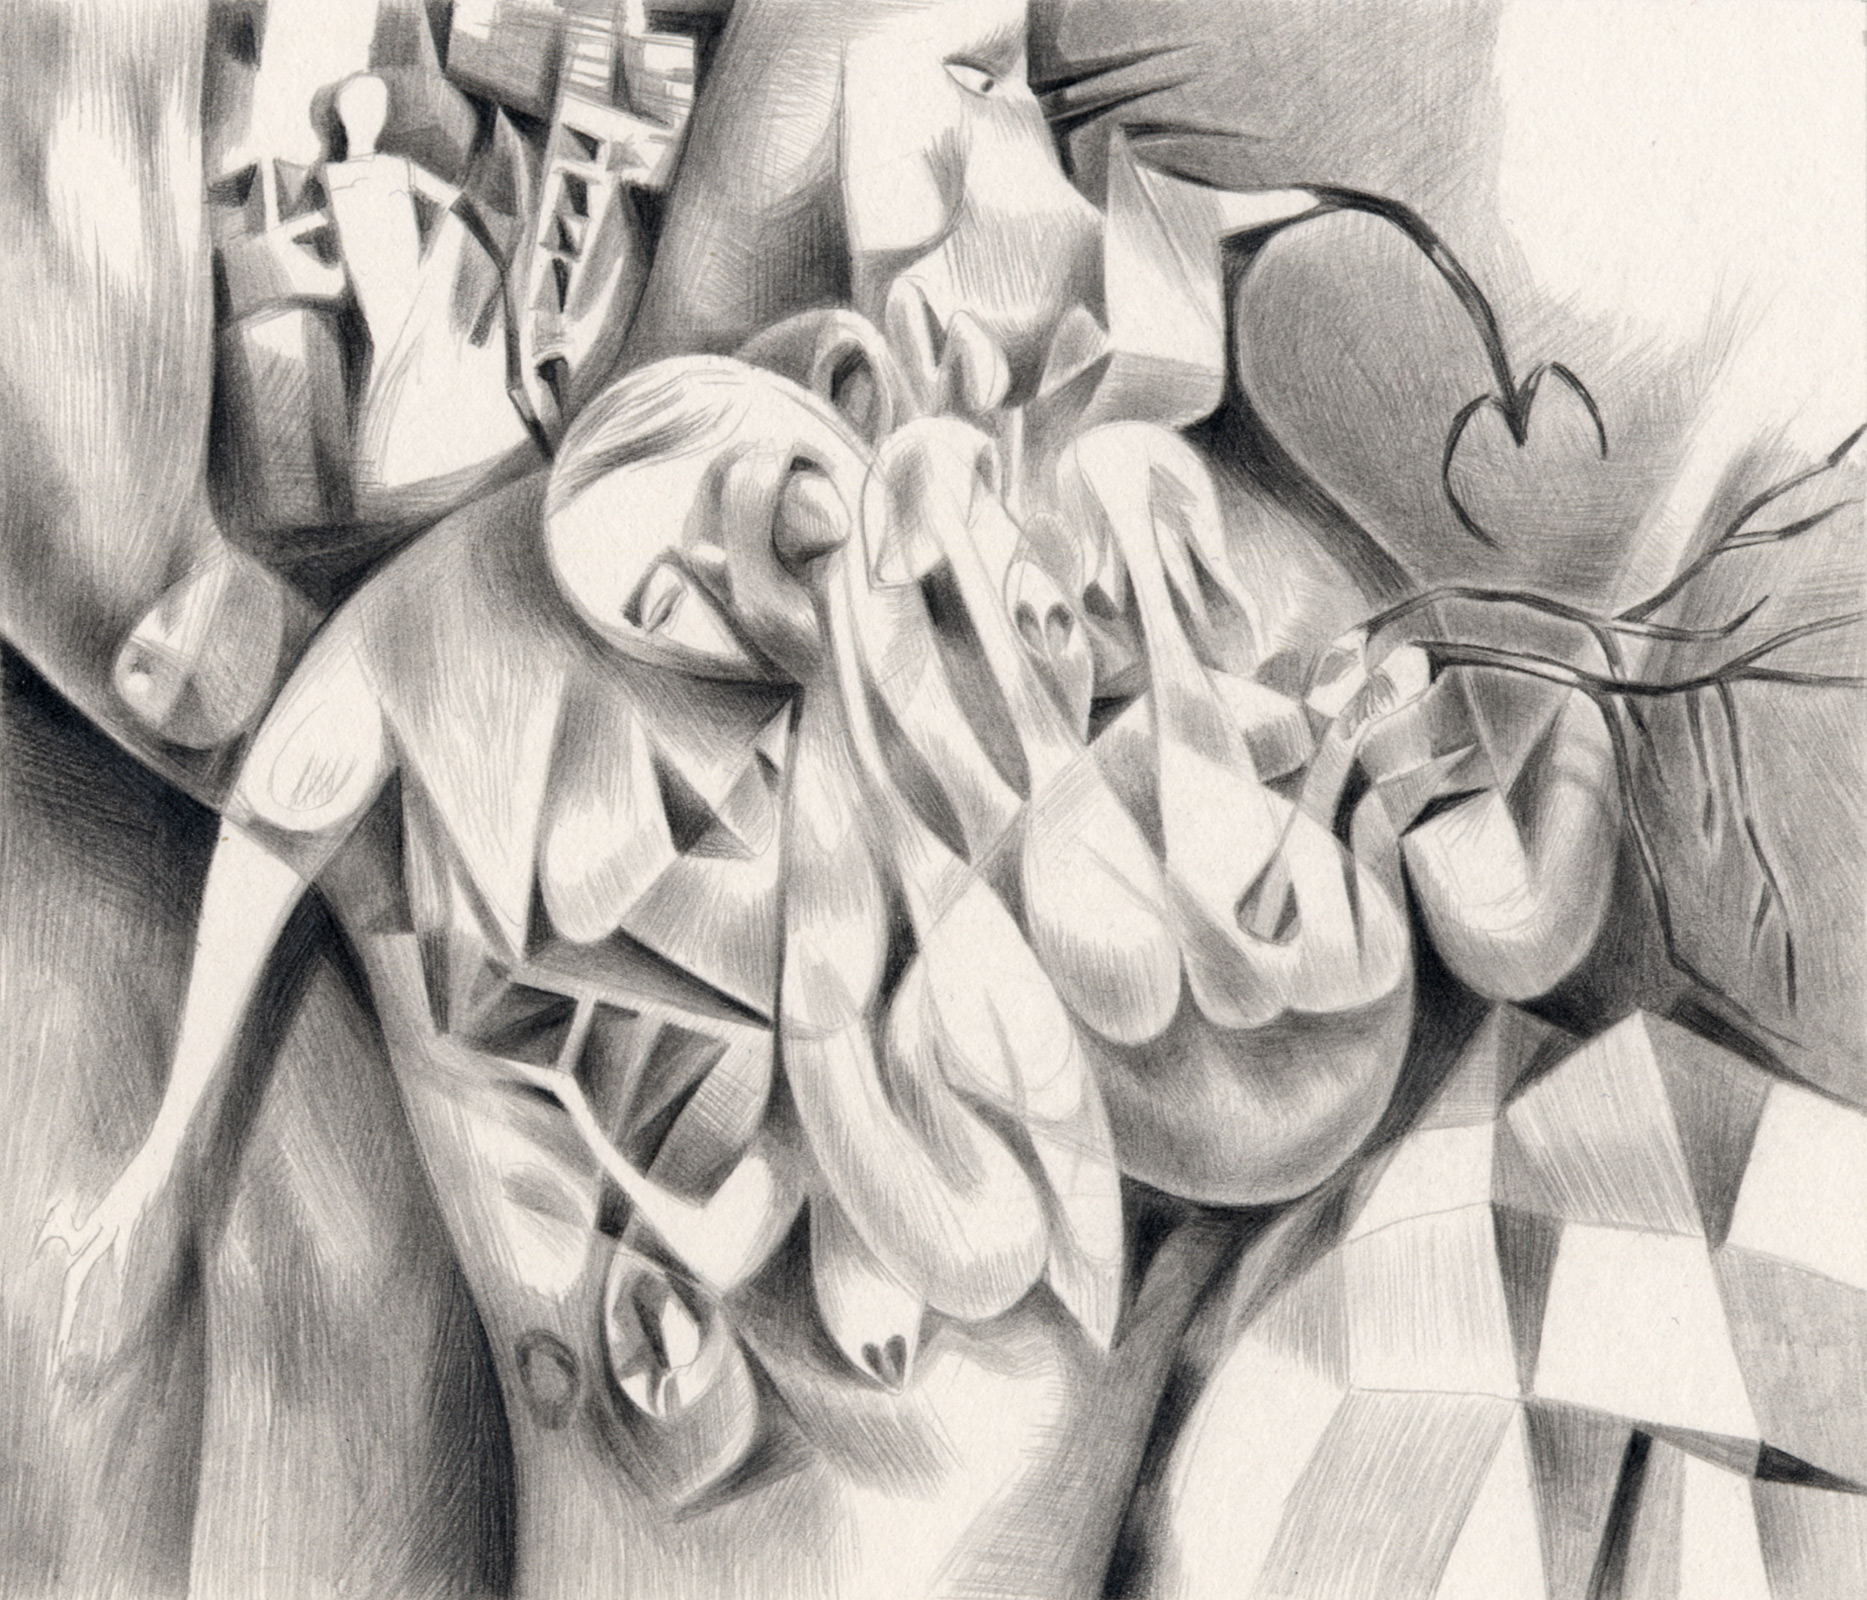   Conjoined , 2003. Graphite on paper. 7" x 6". 